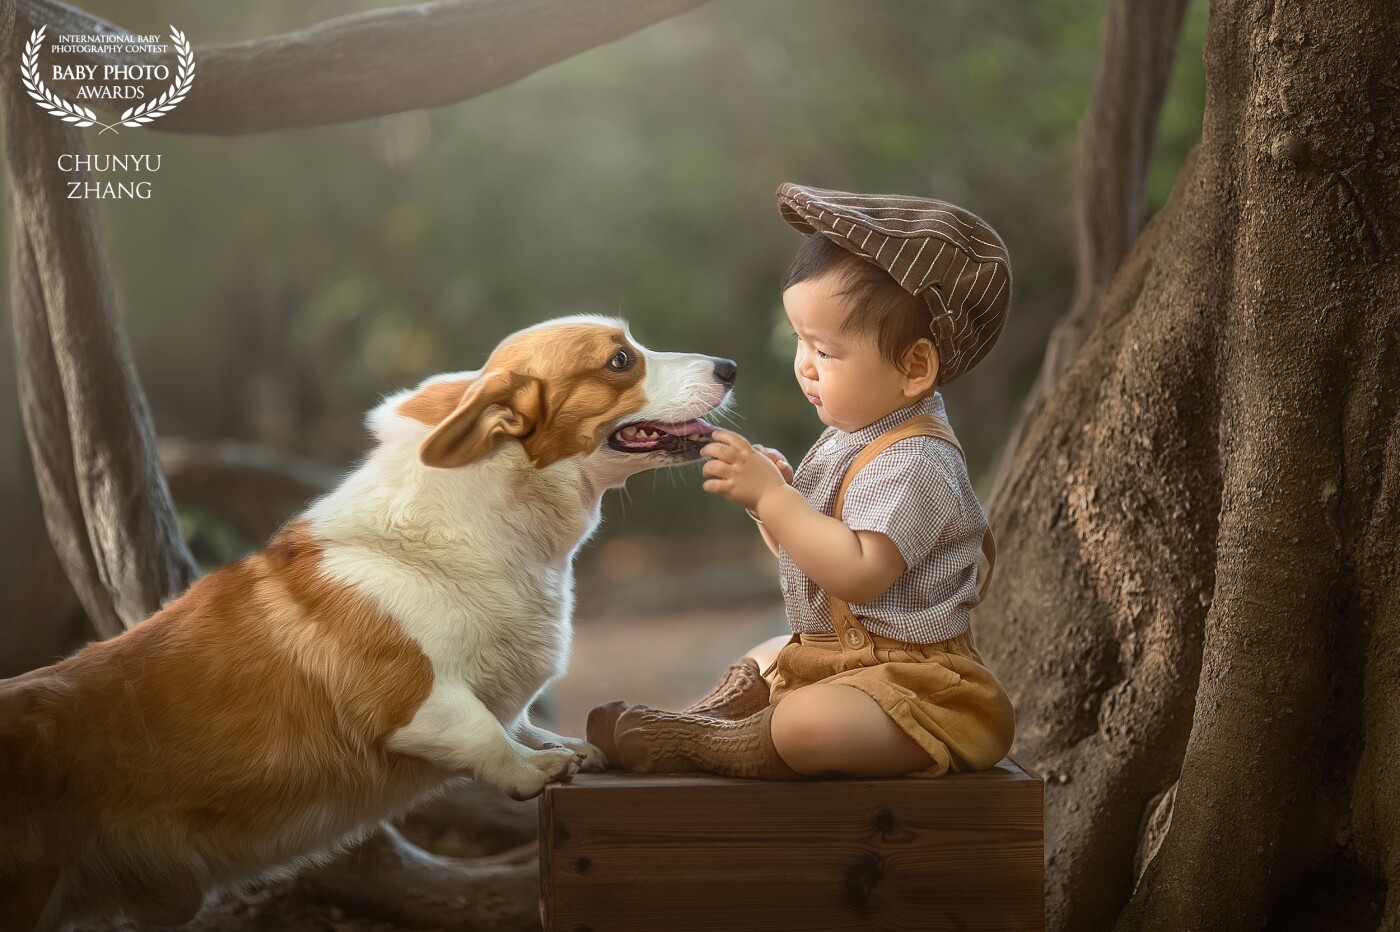 This little boy is playing with a corgi and wants to feed his dog, but he isn't quite sure what the dog likes to eat. So he decided to chat with the dog.